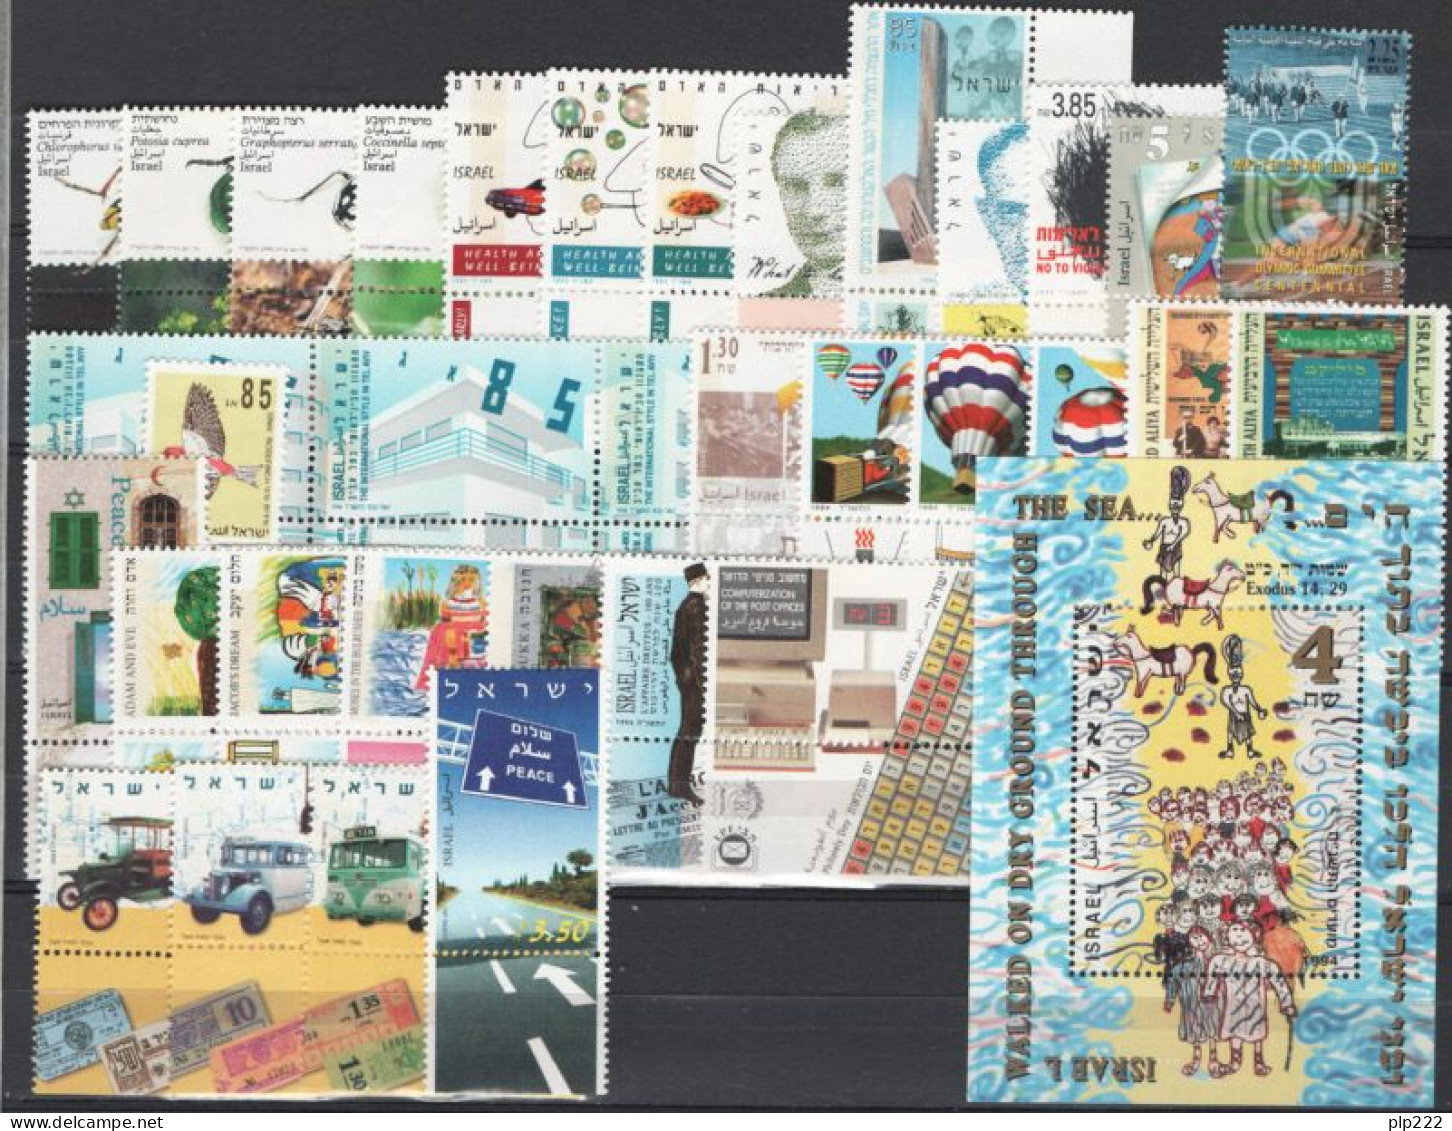 Israele 1994 Annata Completa Con Appendice / Complete Year Set With Tab **/MNH VF - Full Years